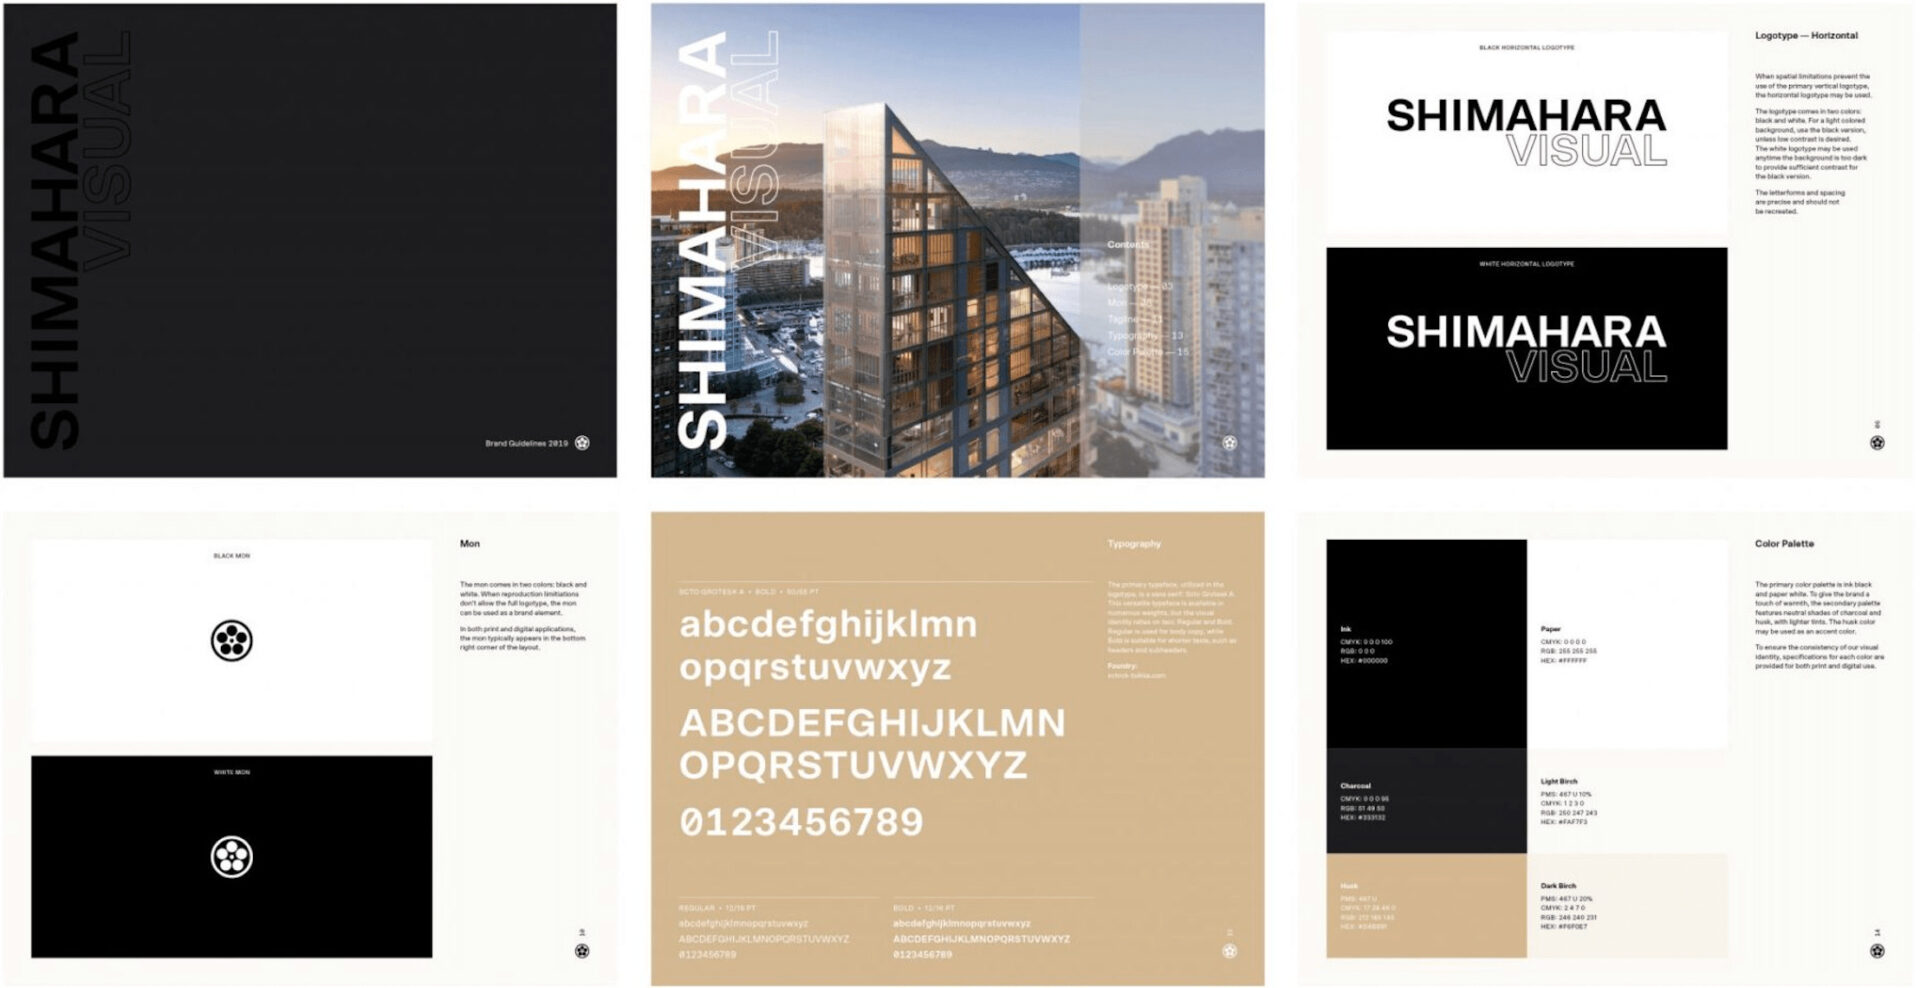 Shimahara Visual new brand identity guidelines created by Flux providing branding agency services